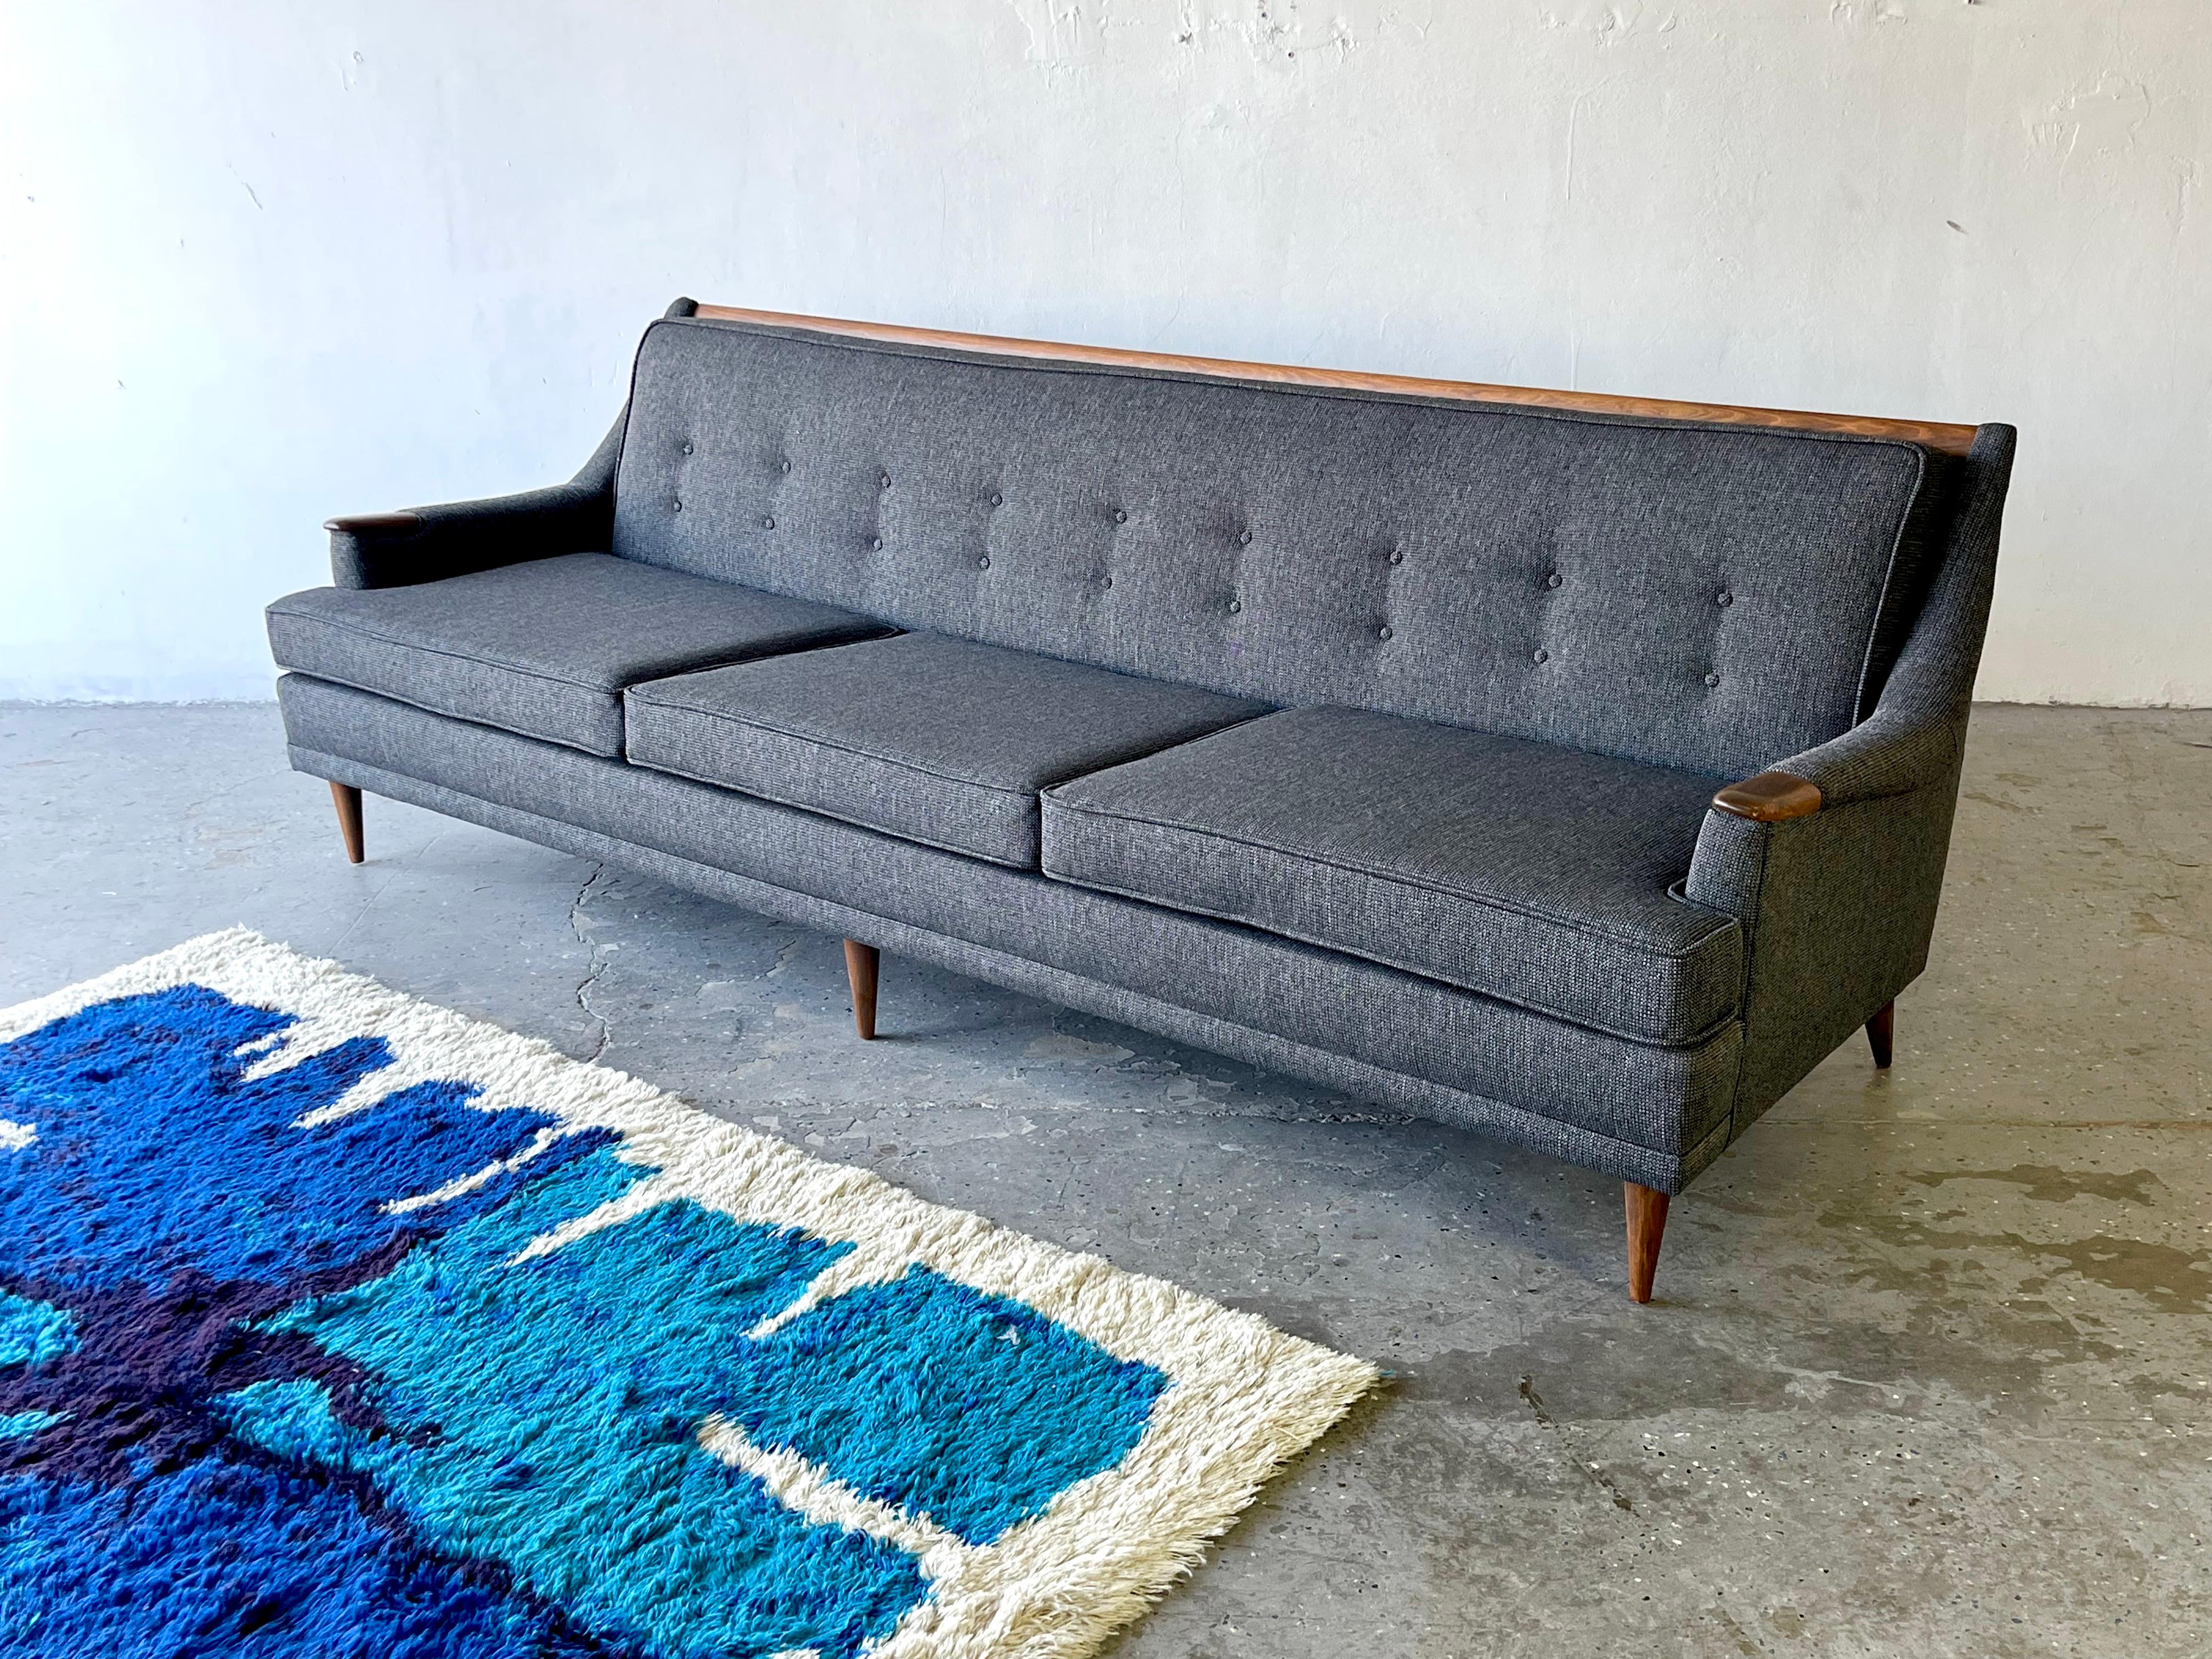 MCM Mid-Century Modern Kroehler sofa walnut new charcoal gray tweed upholstery 

Attractive vintage modern sofa with unique arm rests. Sleek design with clean mid-century lines combined with extreme comfort and new charcoal gray tweed upholstery.